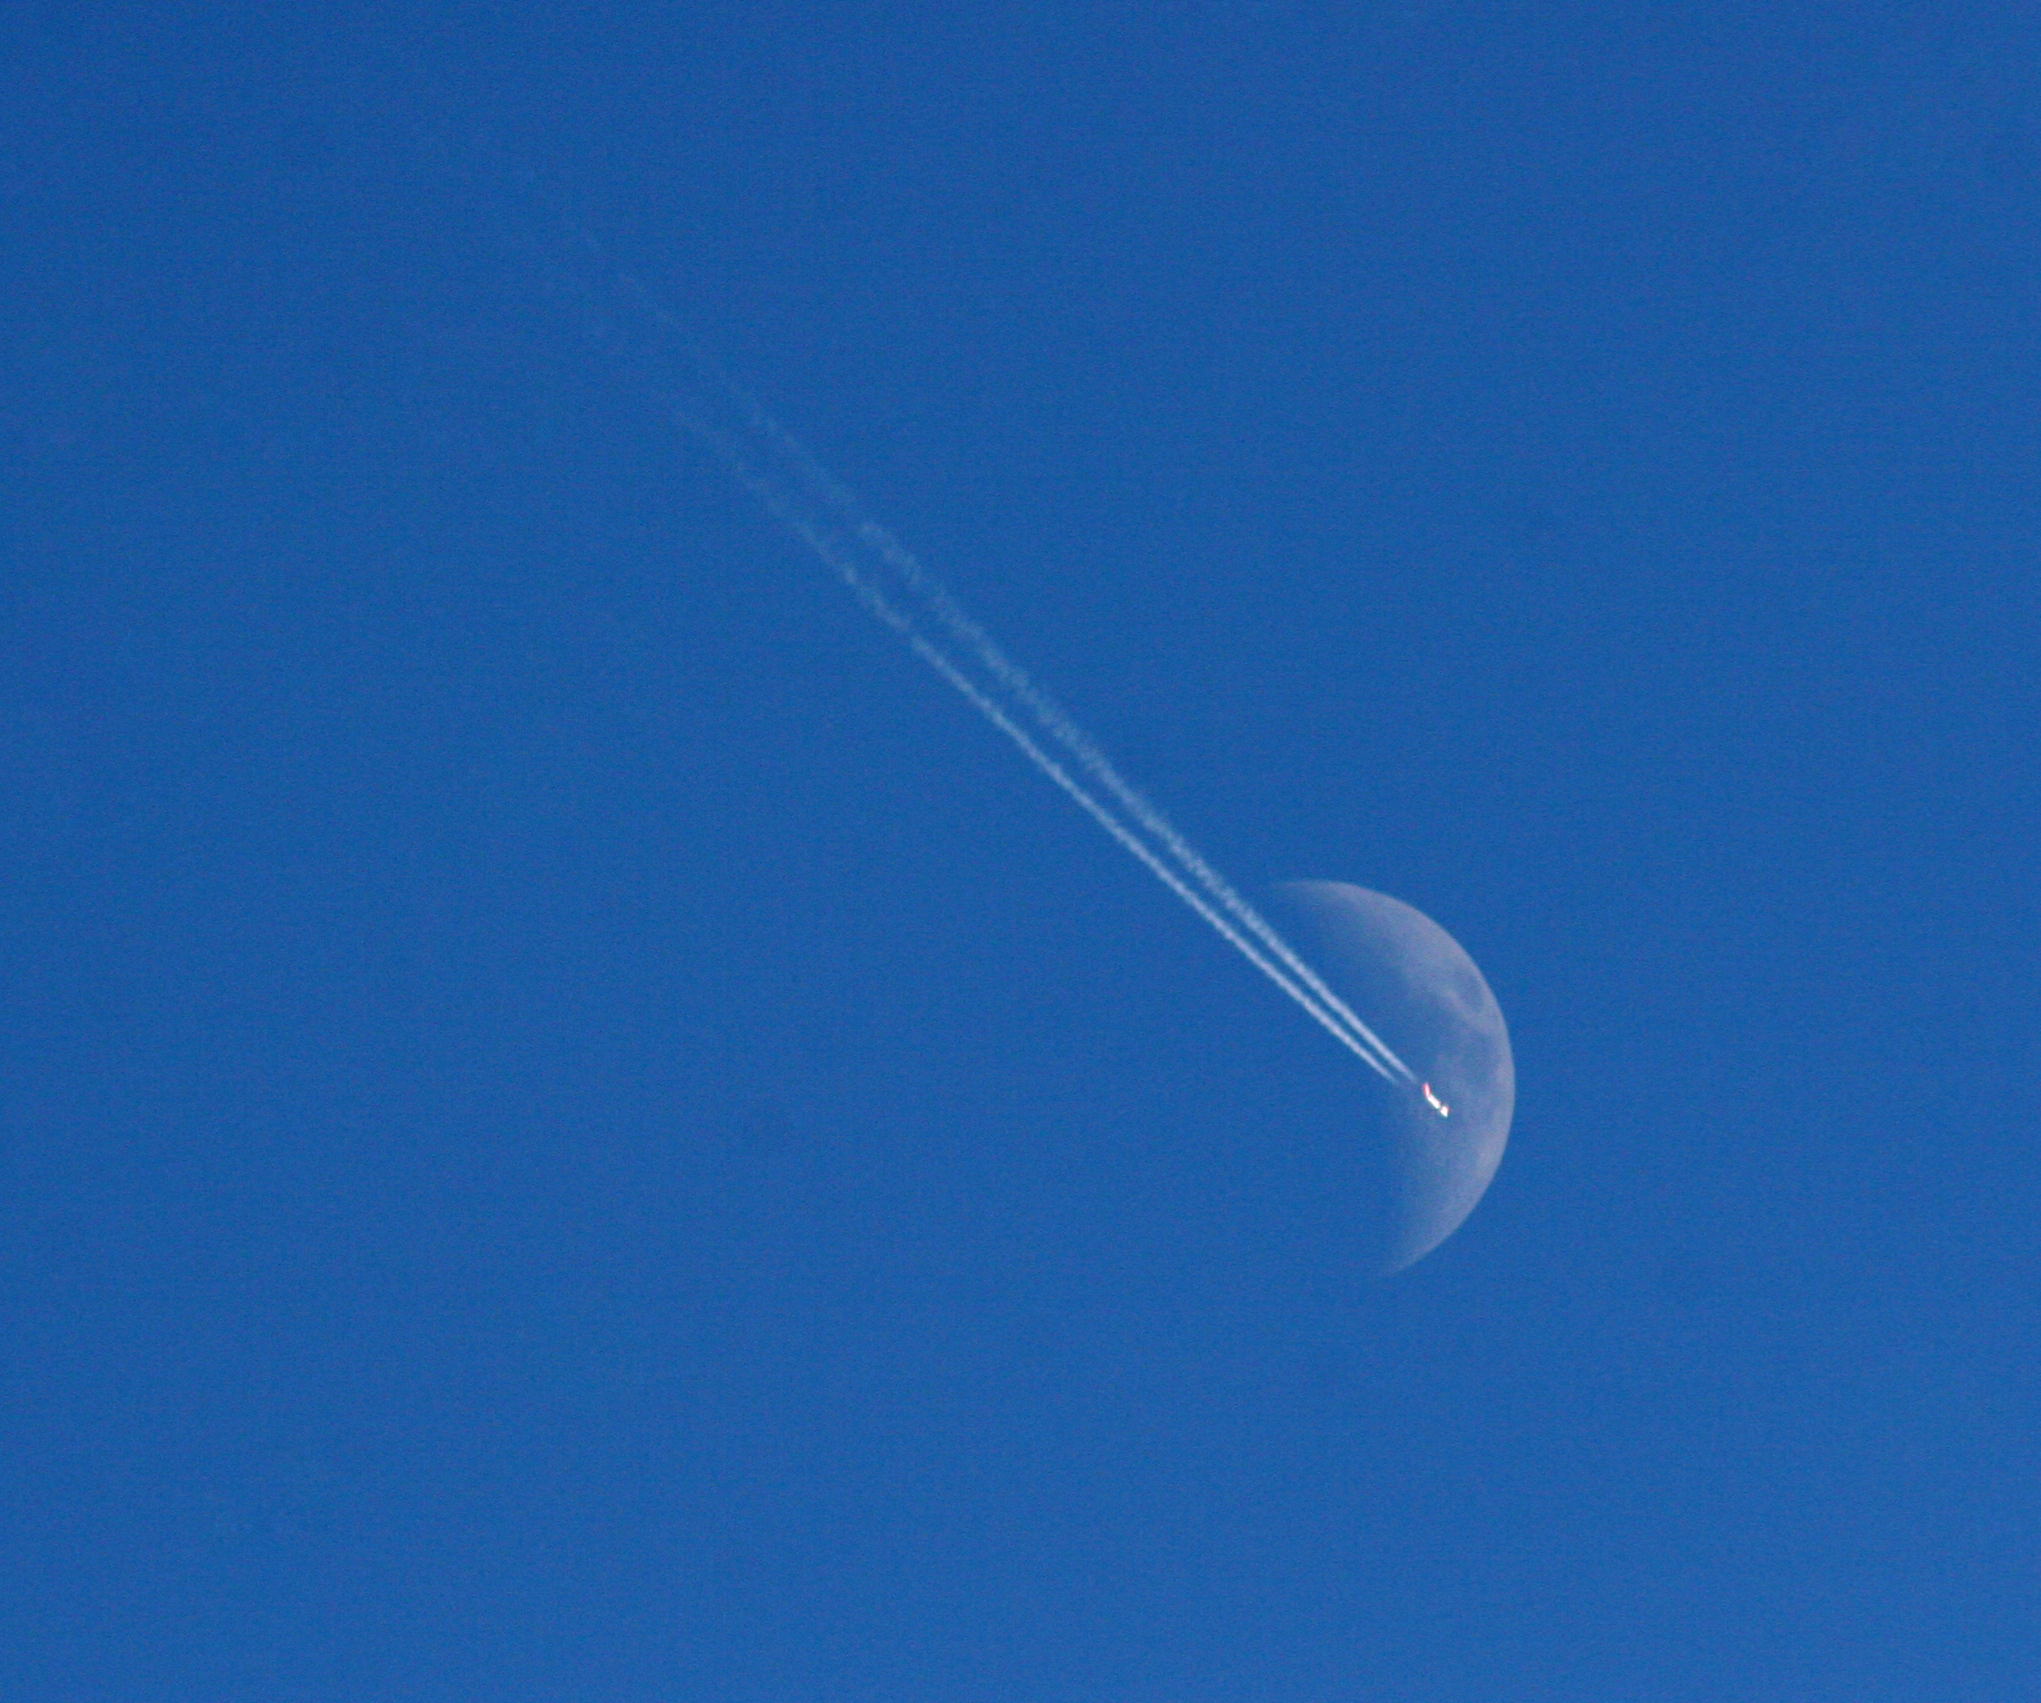 Moon with plane